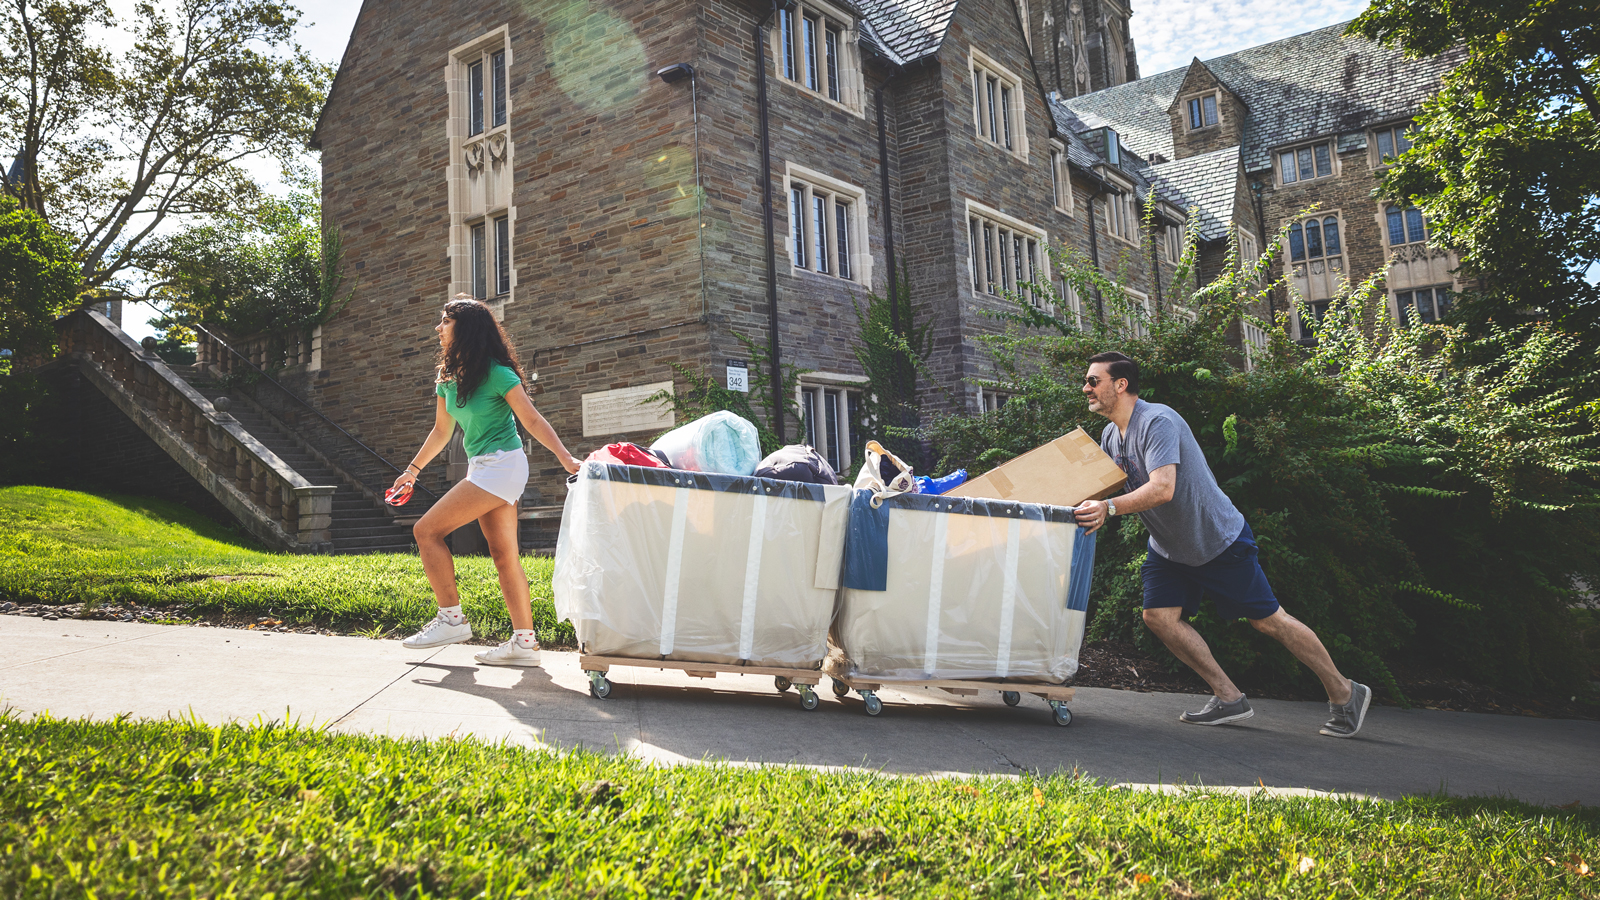 A woman pulls a large wheeling cart filled with belongings up a hill on the Cornell University